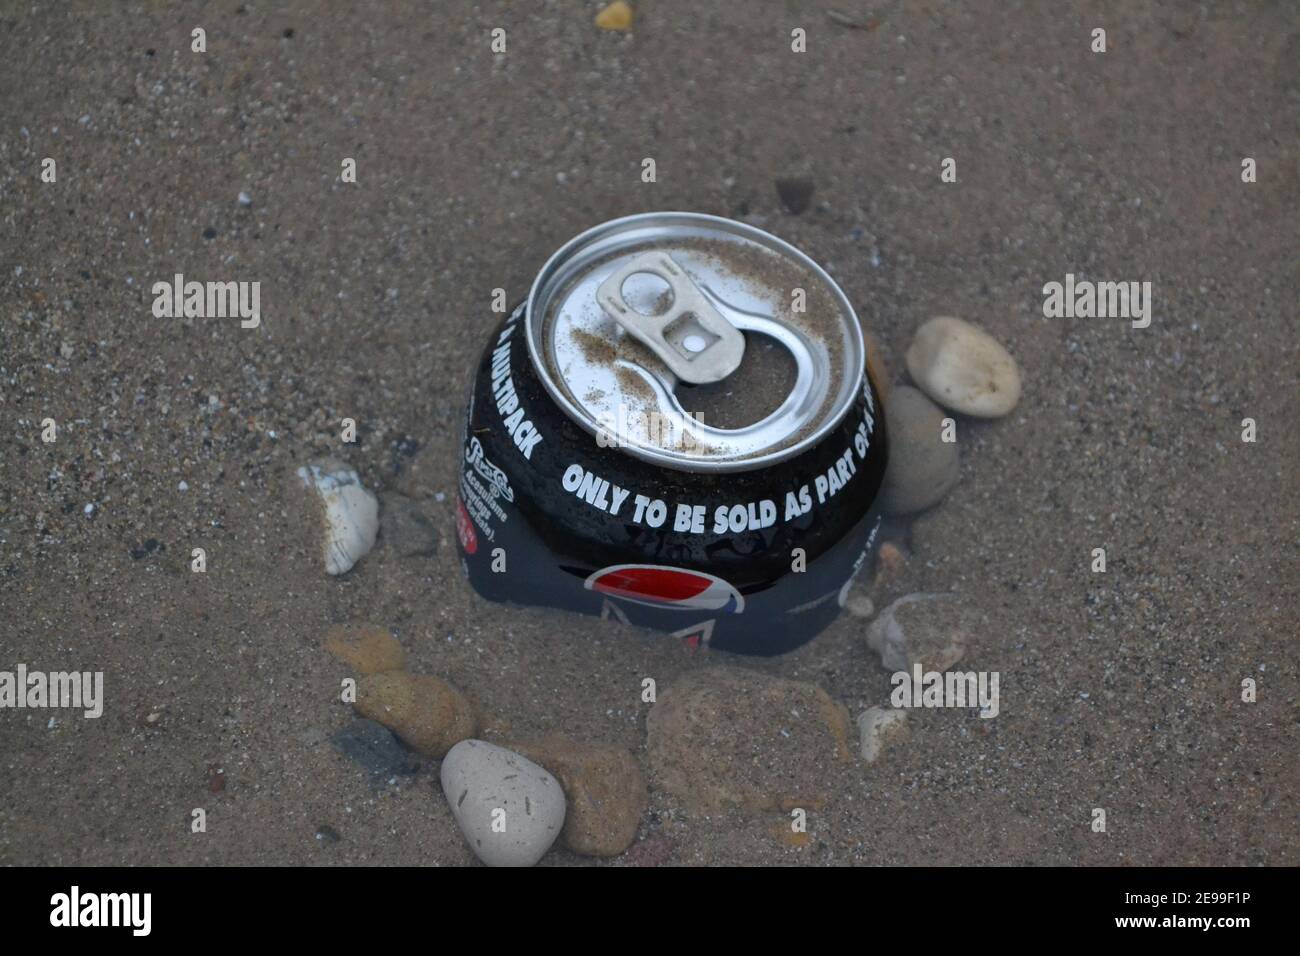 Soft Drinks Can Left On A Beach - Pushed Into The Sand - Rubbish - Litter in Sand - Pebbles / Stones / Sand - Waste Pollution - Yorkshire - UK Stock Photo